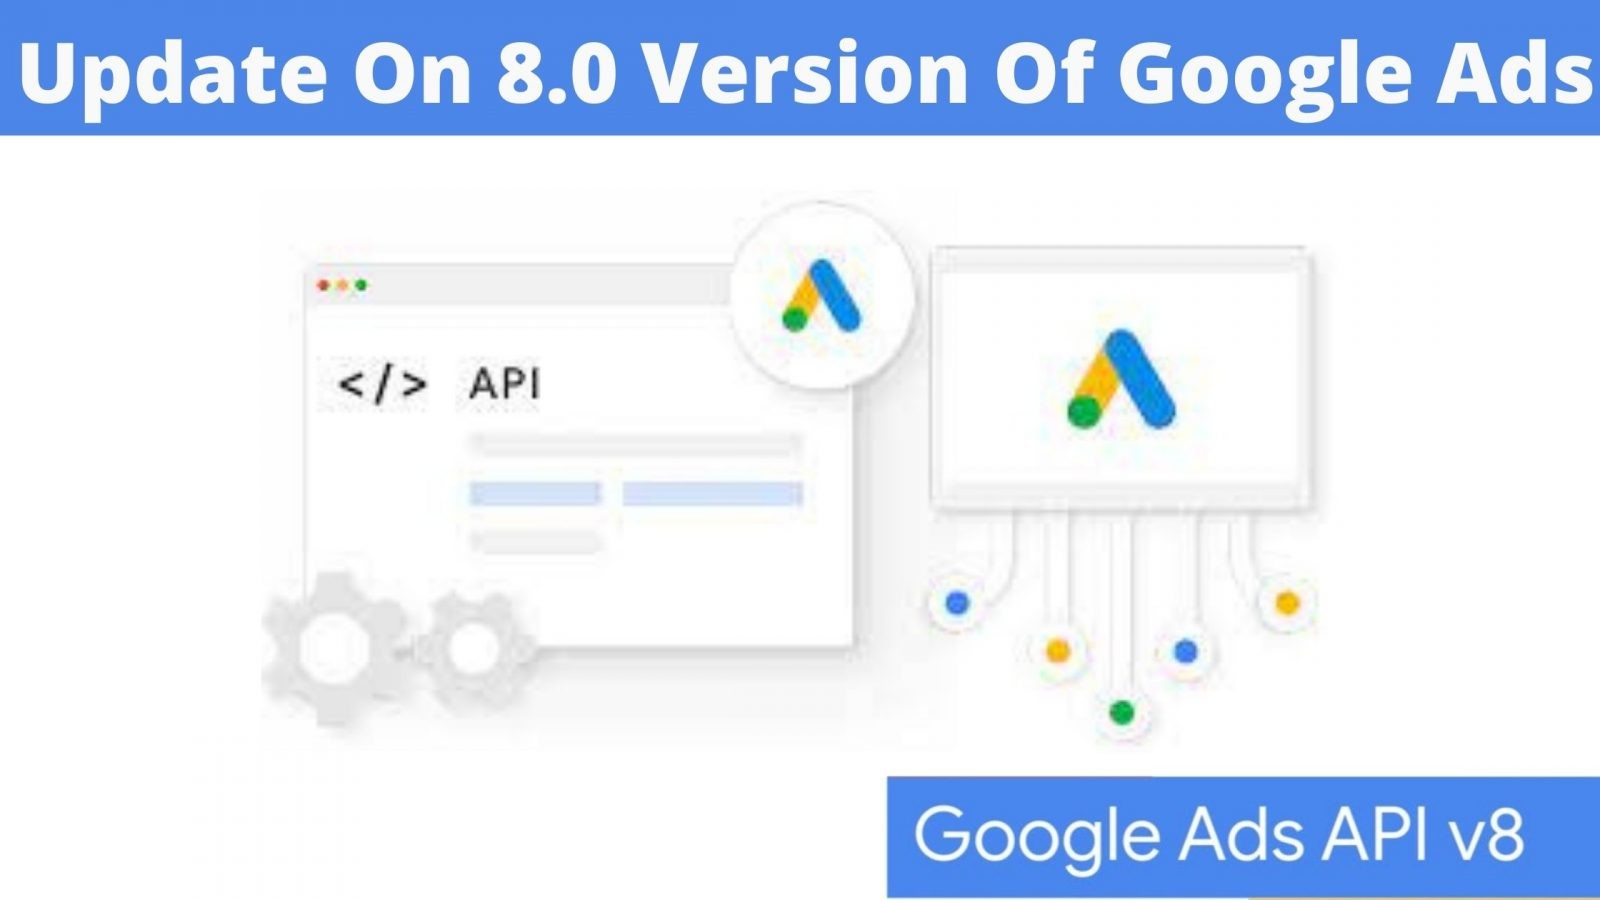 Know All The Important Updates On 8.0 Version Of Google Ads (1)